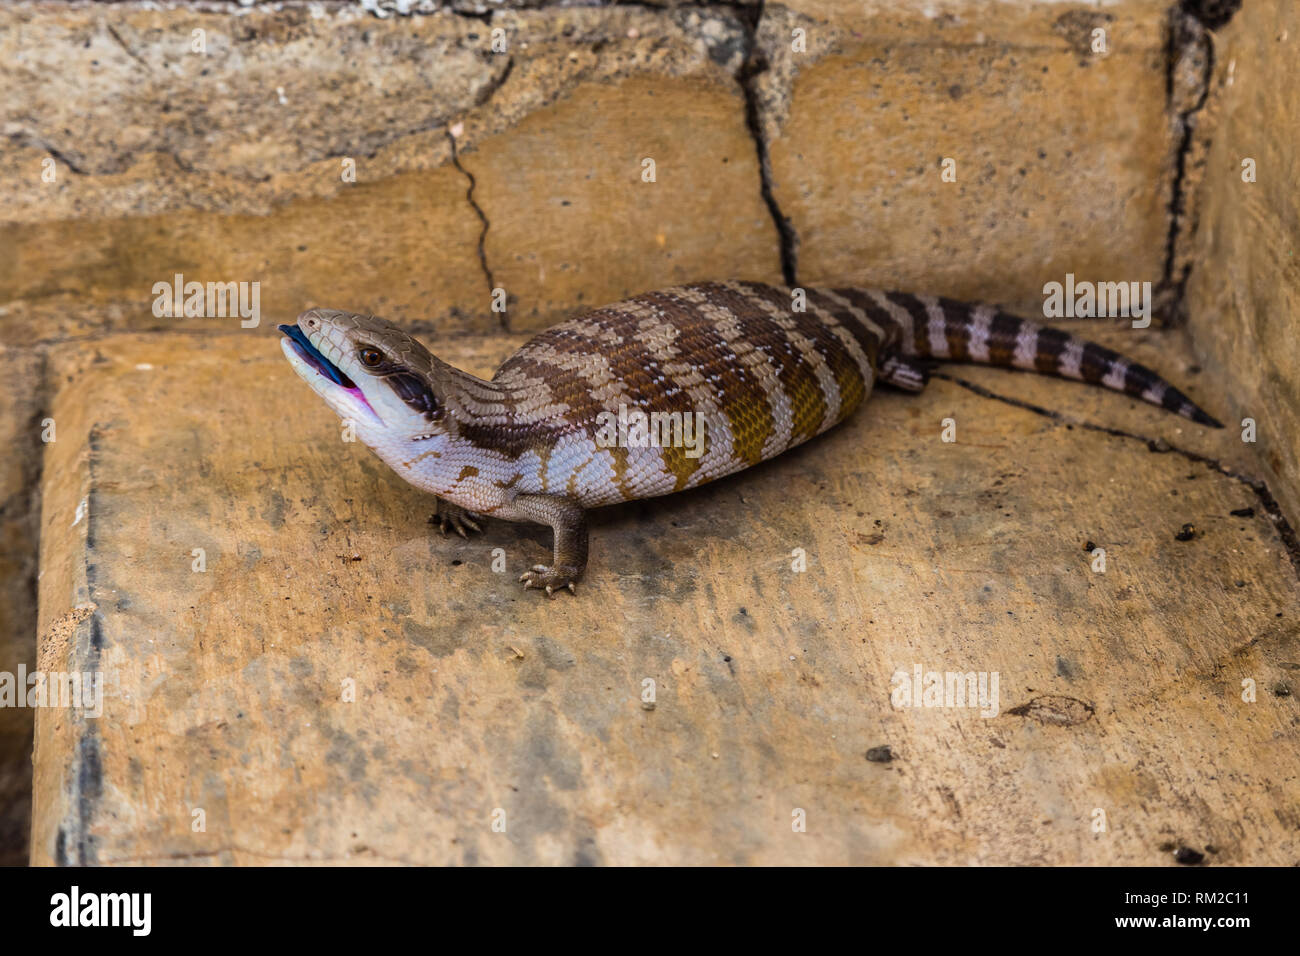 Blue-Tongued Skink (family Scincidae) on a concrete step in the Upper Hunter, NSW, Australia. Stock Photo